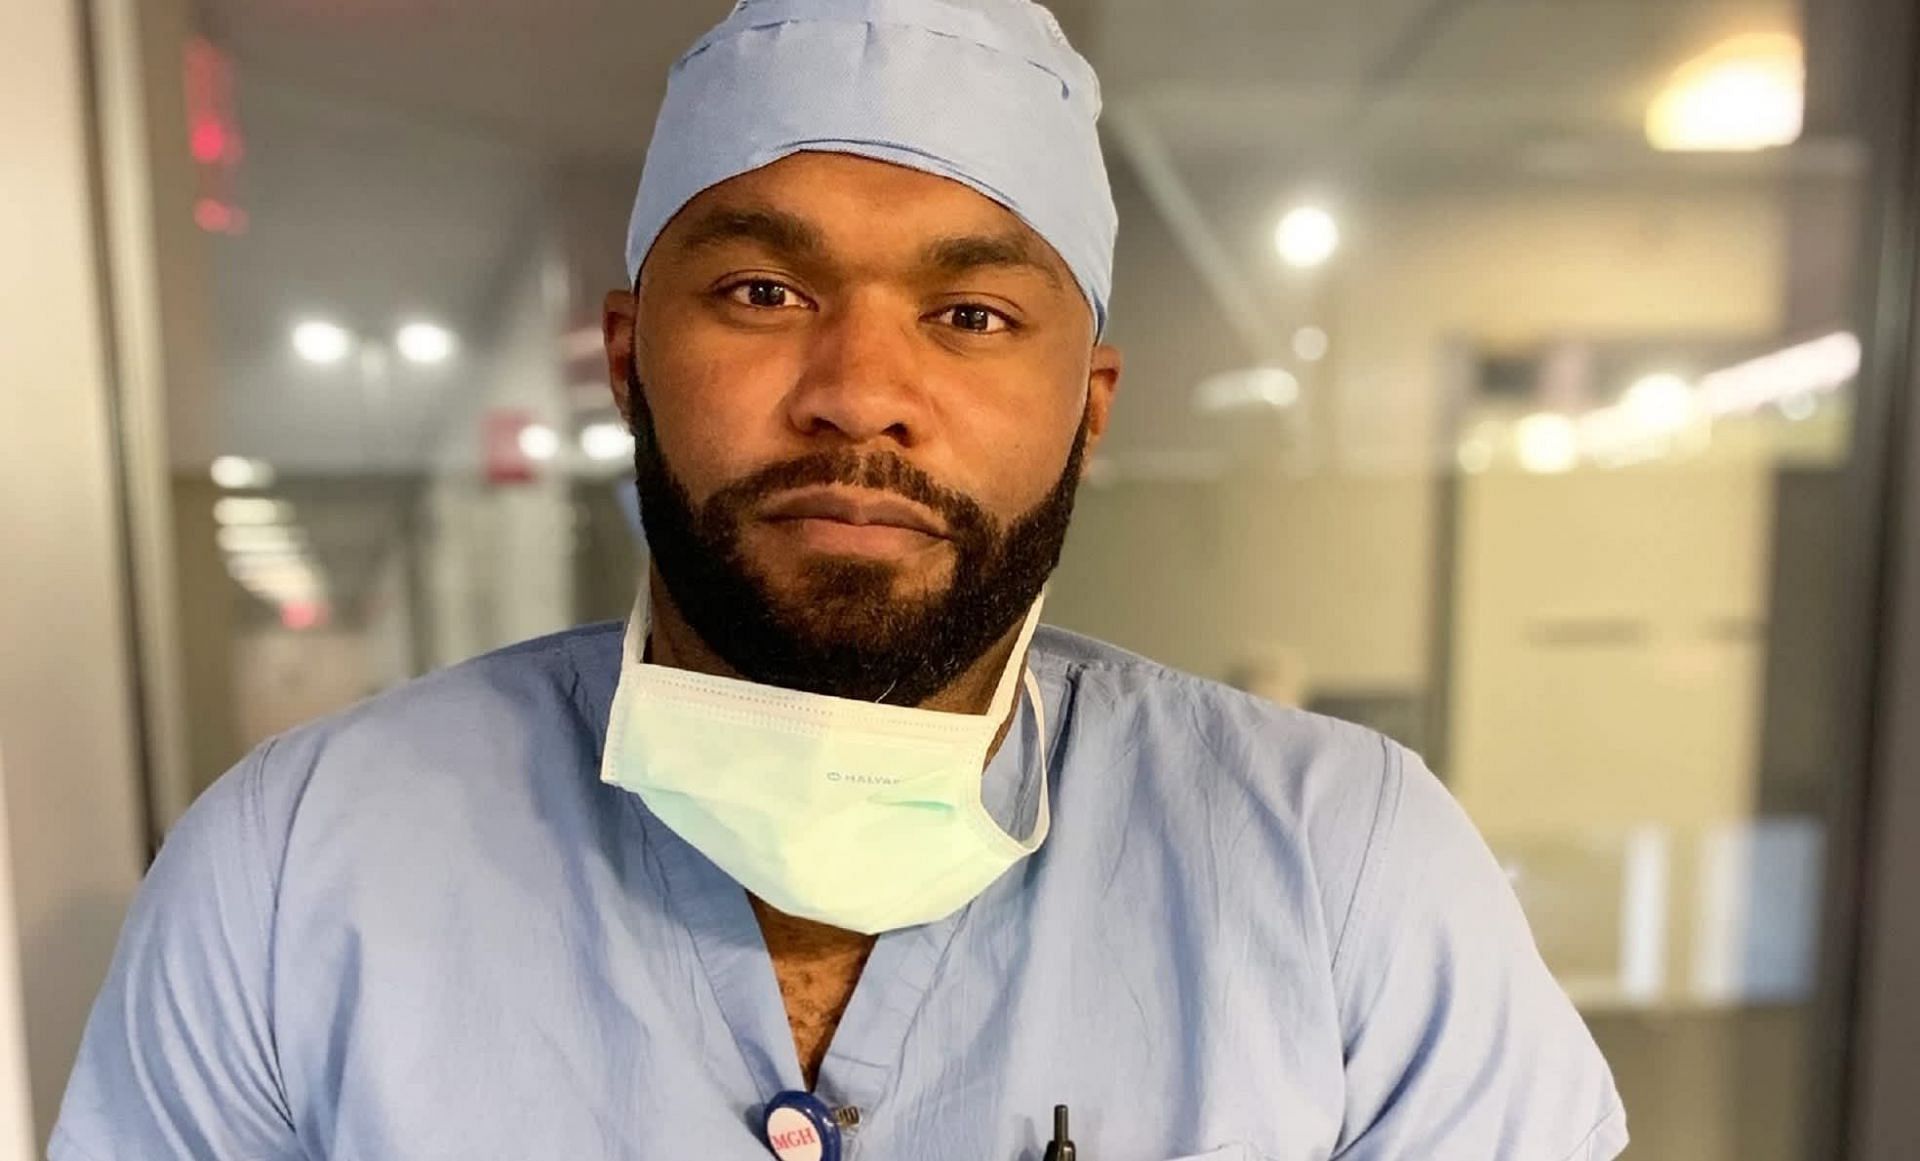 NFL safety turned neurosurgeon Dr. Myron Rolle Source: CNBC